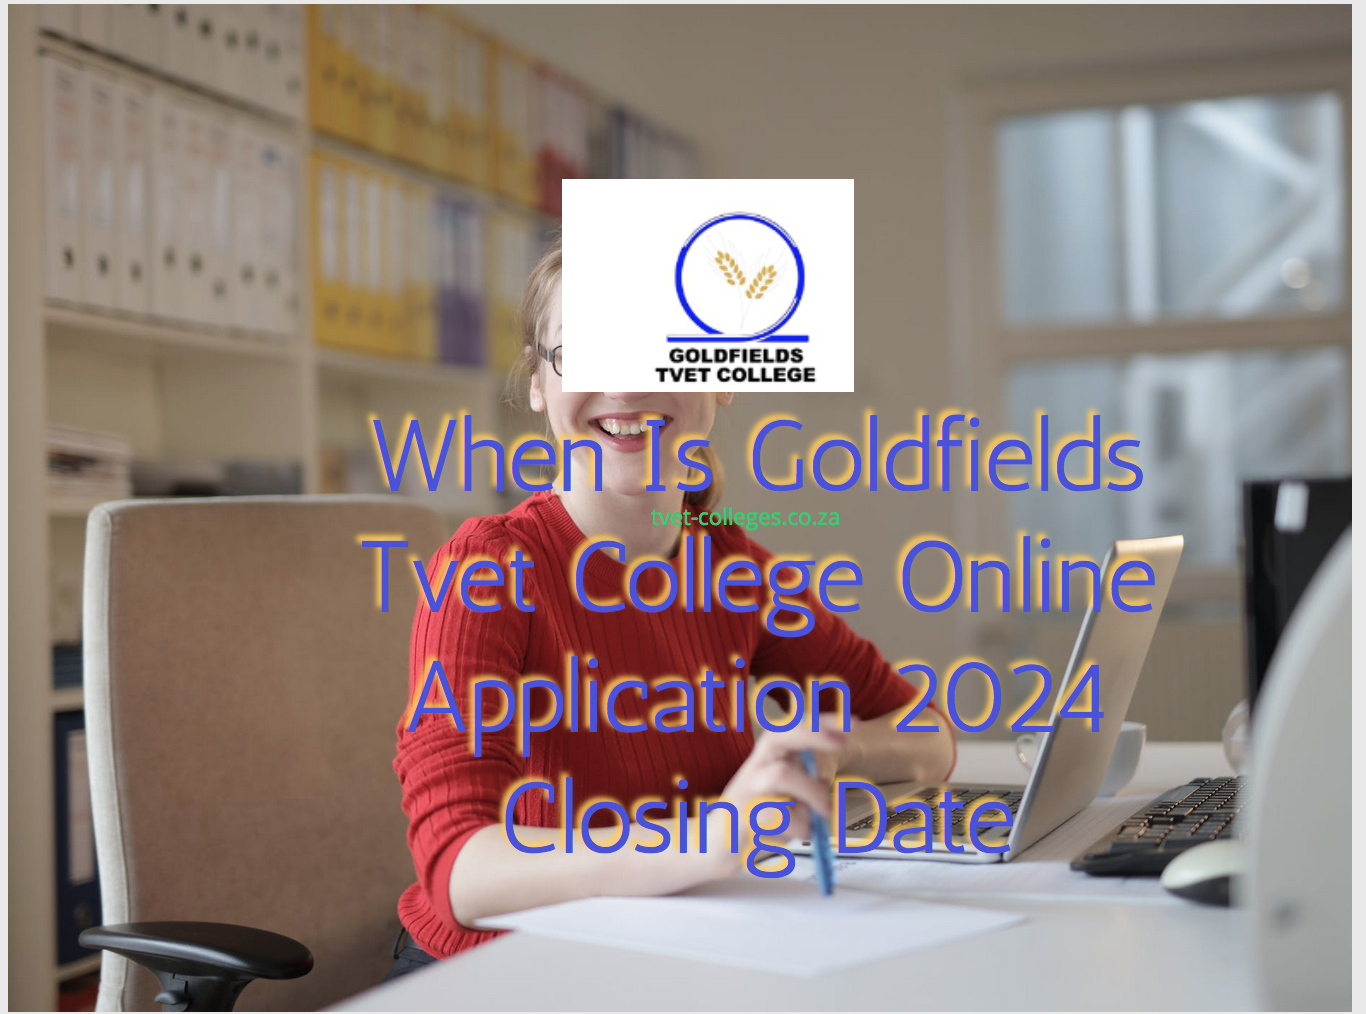 When Is Goldfields Tvet College Online Application 2024 Closing Date